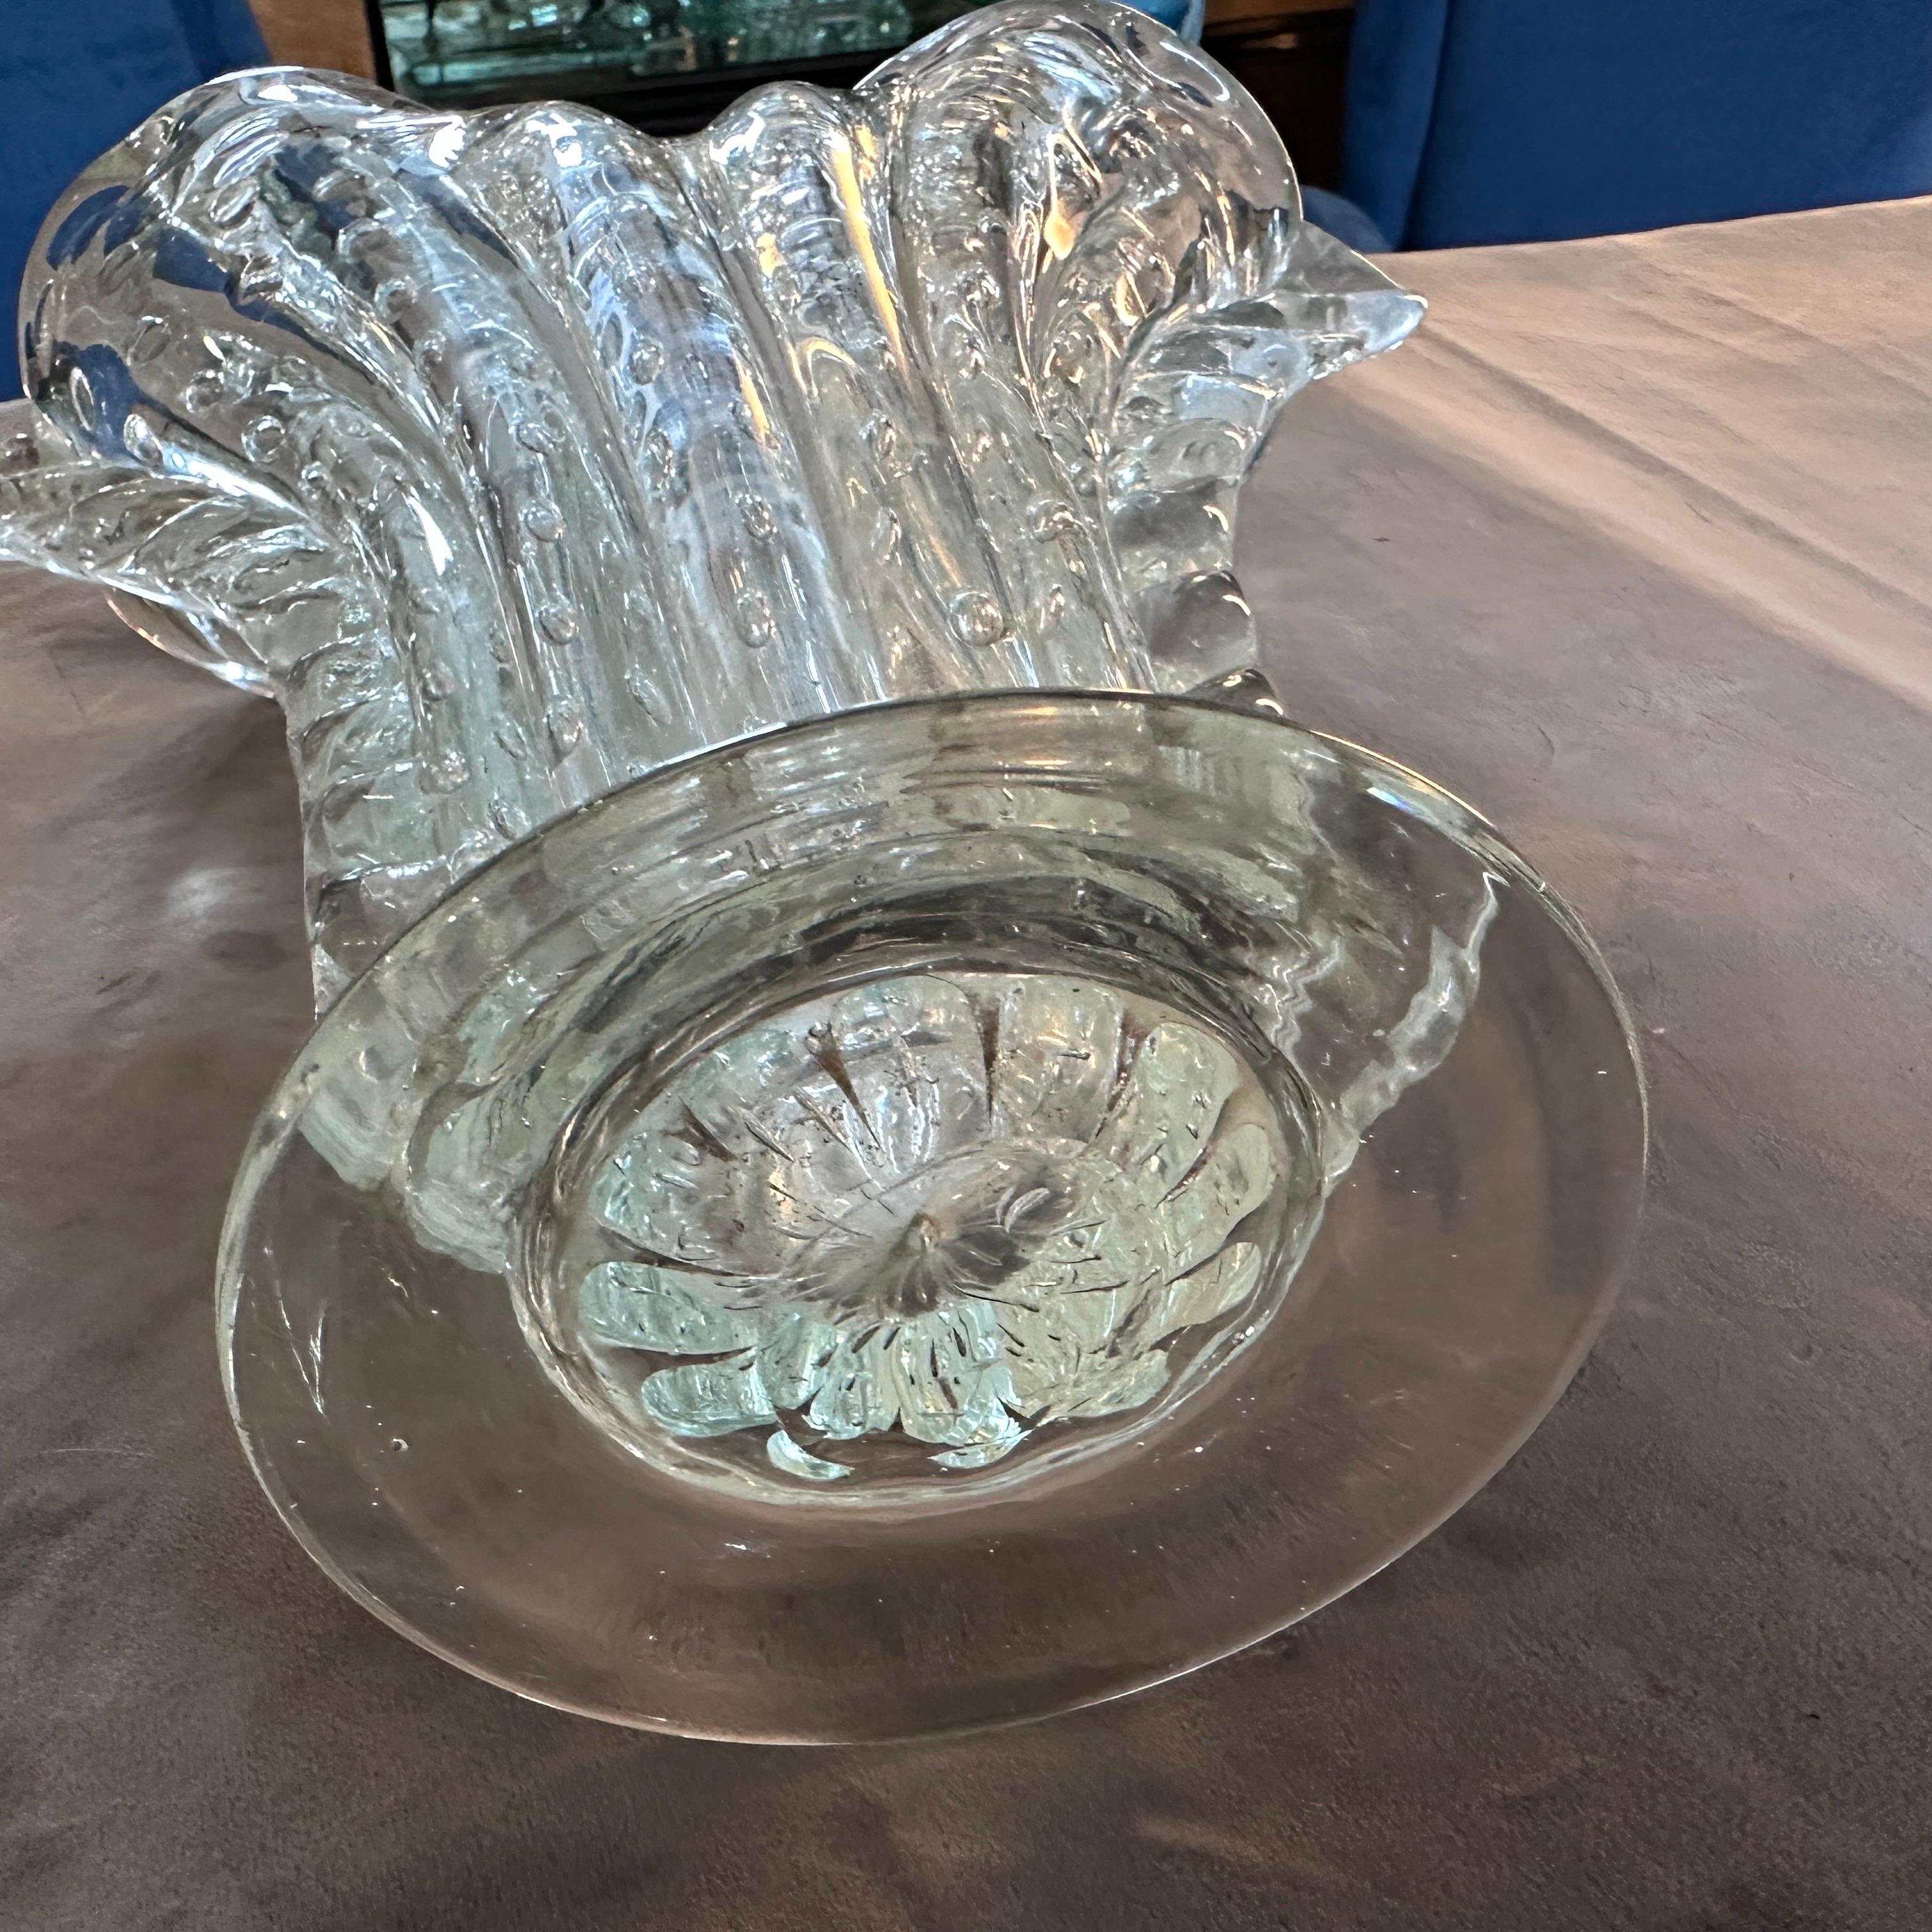 1950s Mid-Century Modern Bullicante Clear Murano Glass Vase by Barovier In Good Condition For Sale In Aci Castello, IT